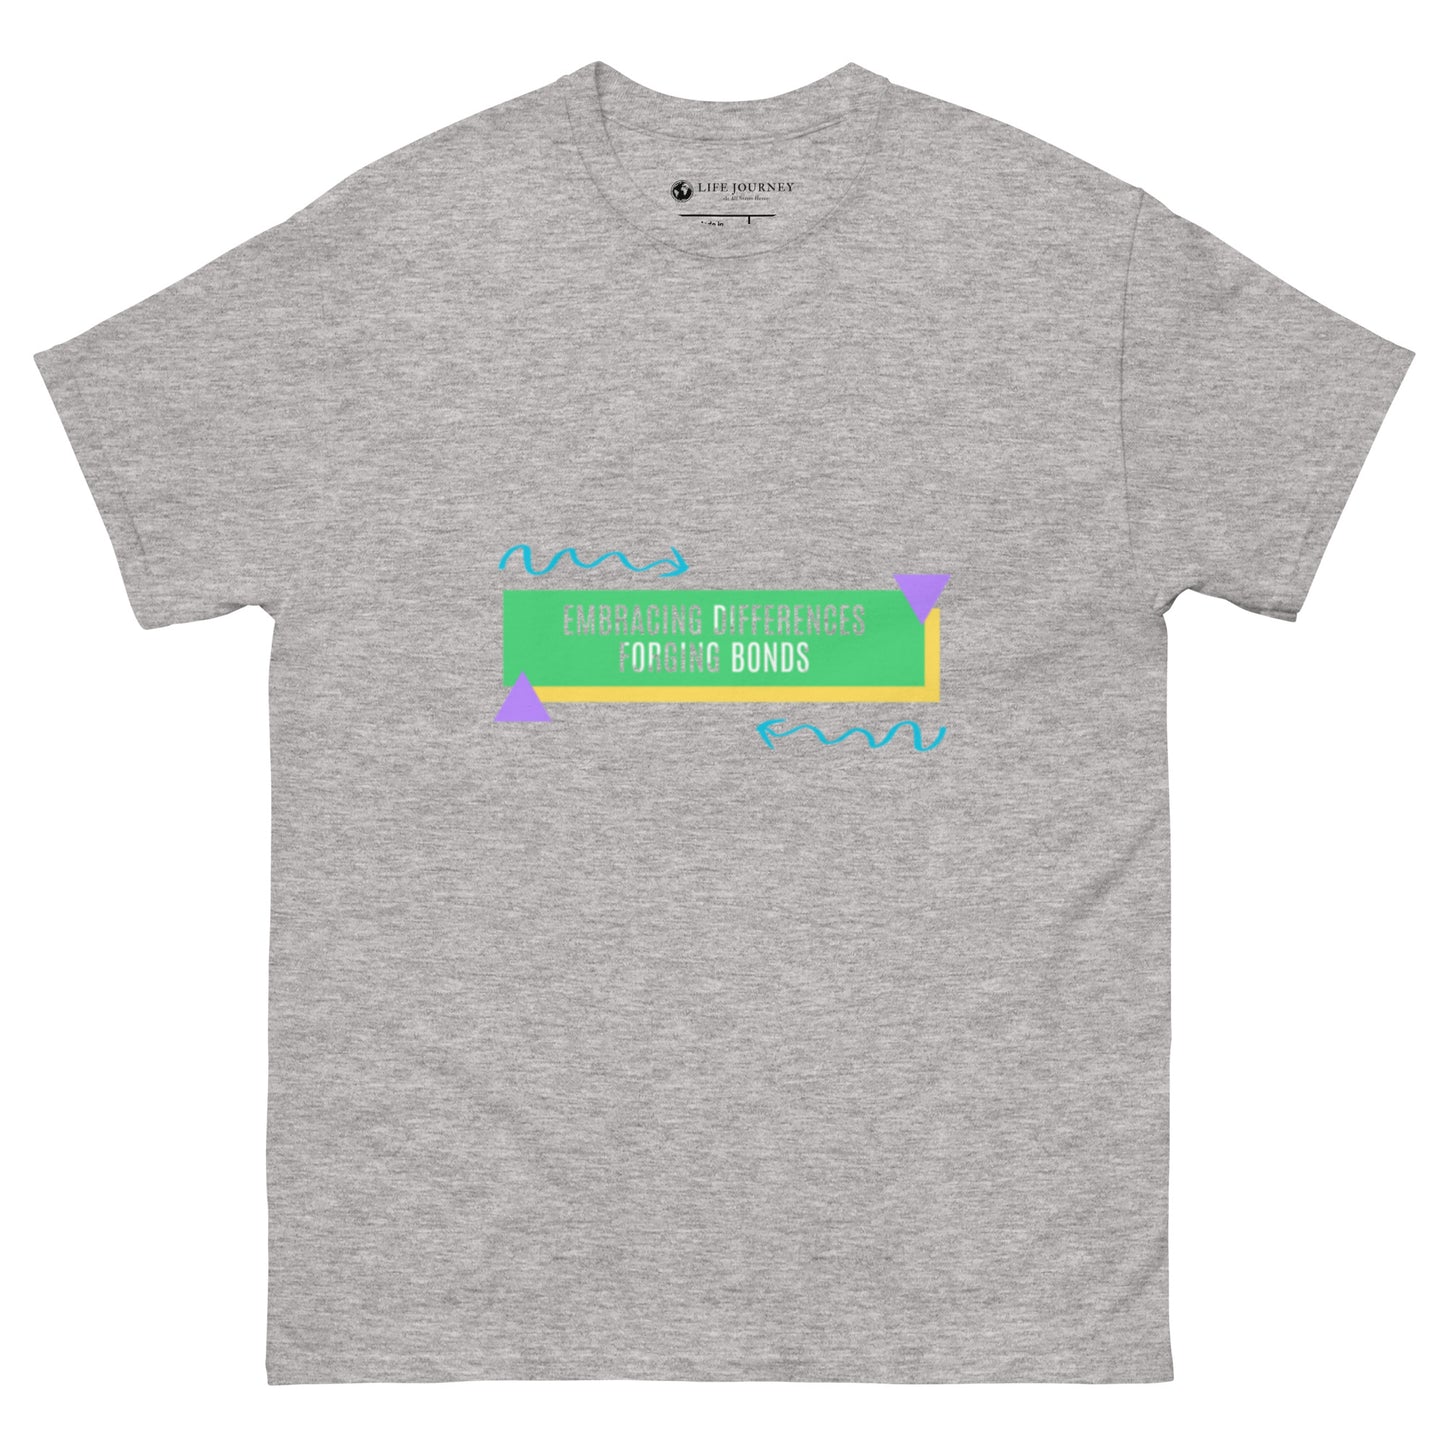 Men's classic tee Embracing Differences Forging Bonds